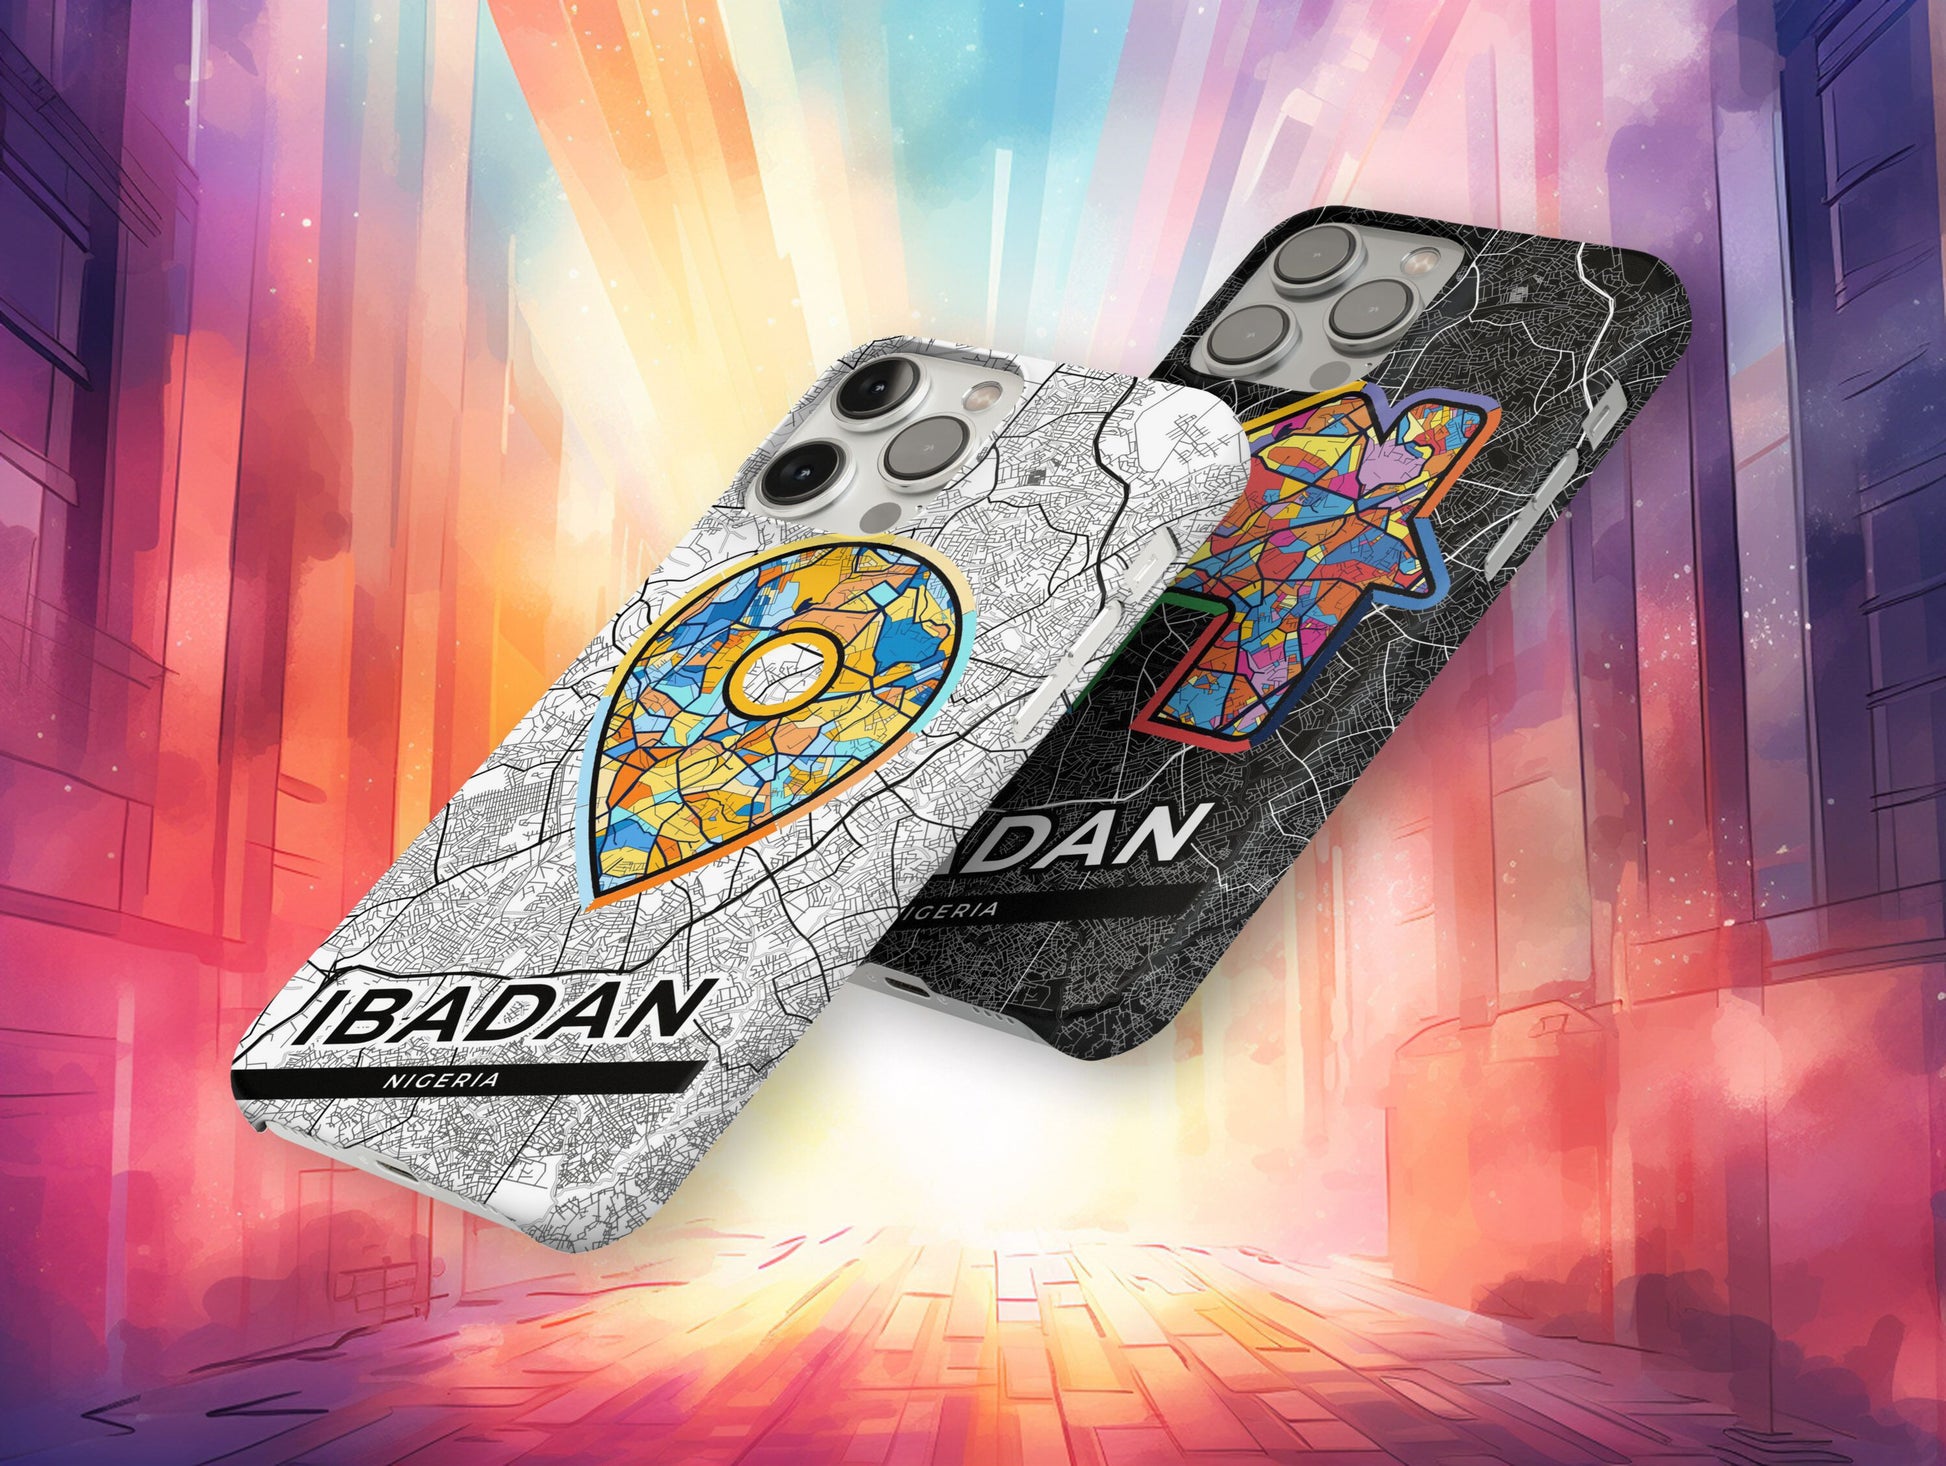 Ibadan Nigeria slim phone case with colorful icon. Birthday, wedding or housewarming gift. Couple match cases.